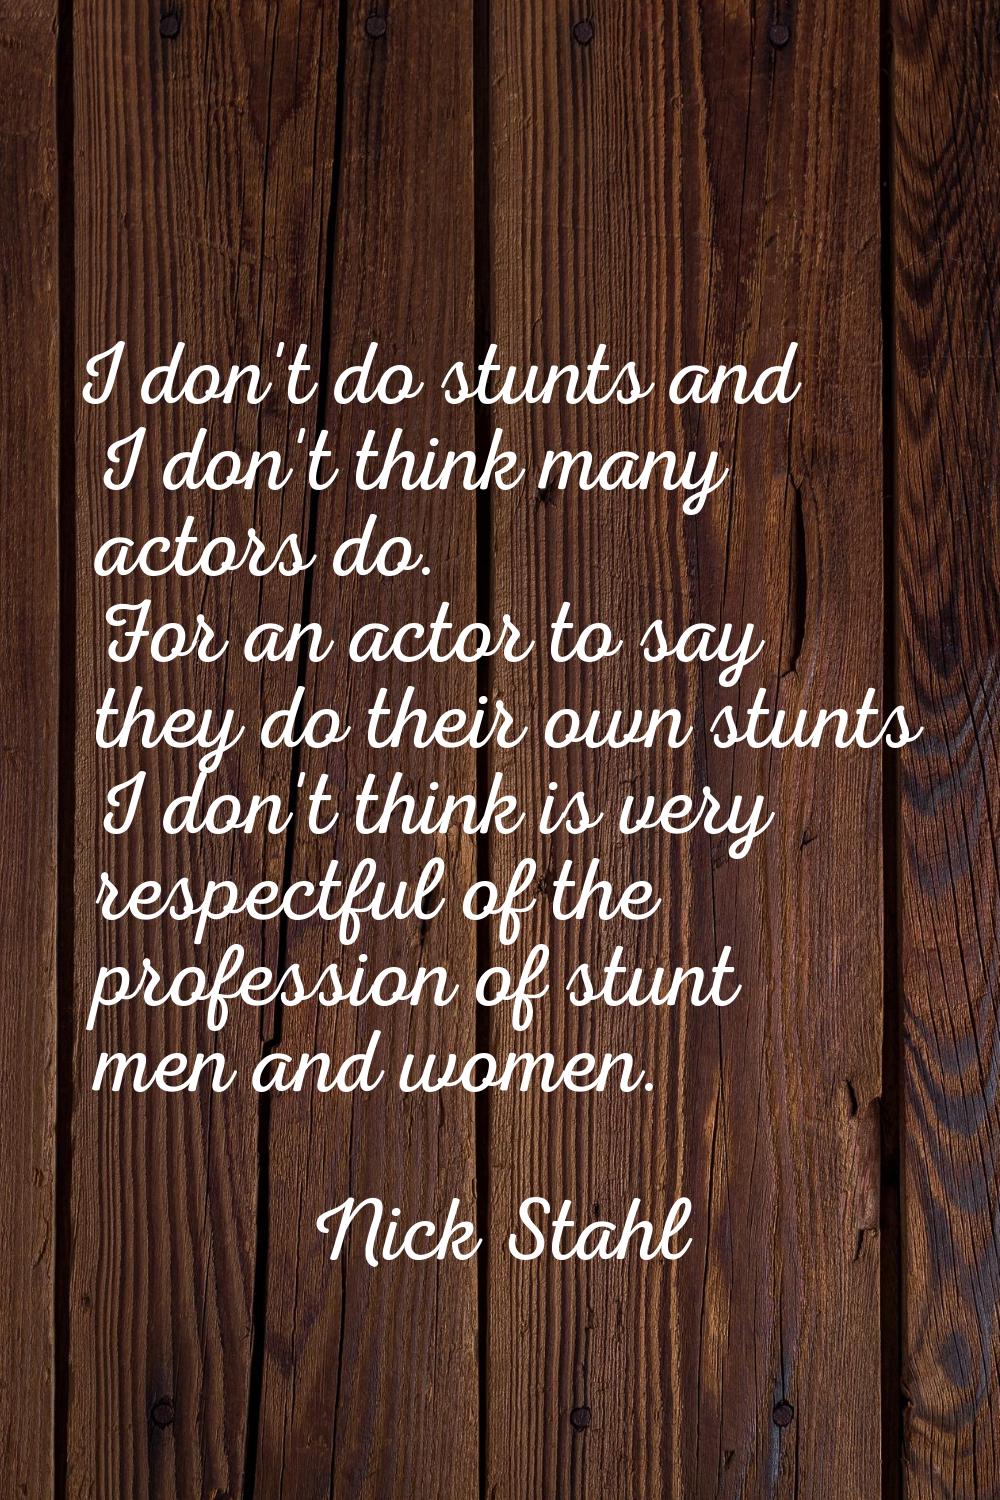 I don't do stunts and I don't think many actors do. For an actor to say they do their own stunts I 